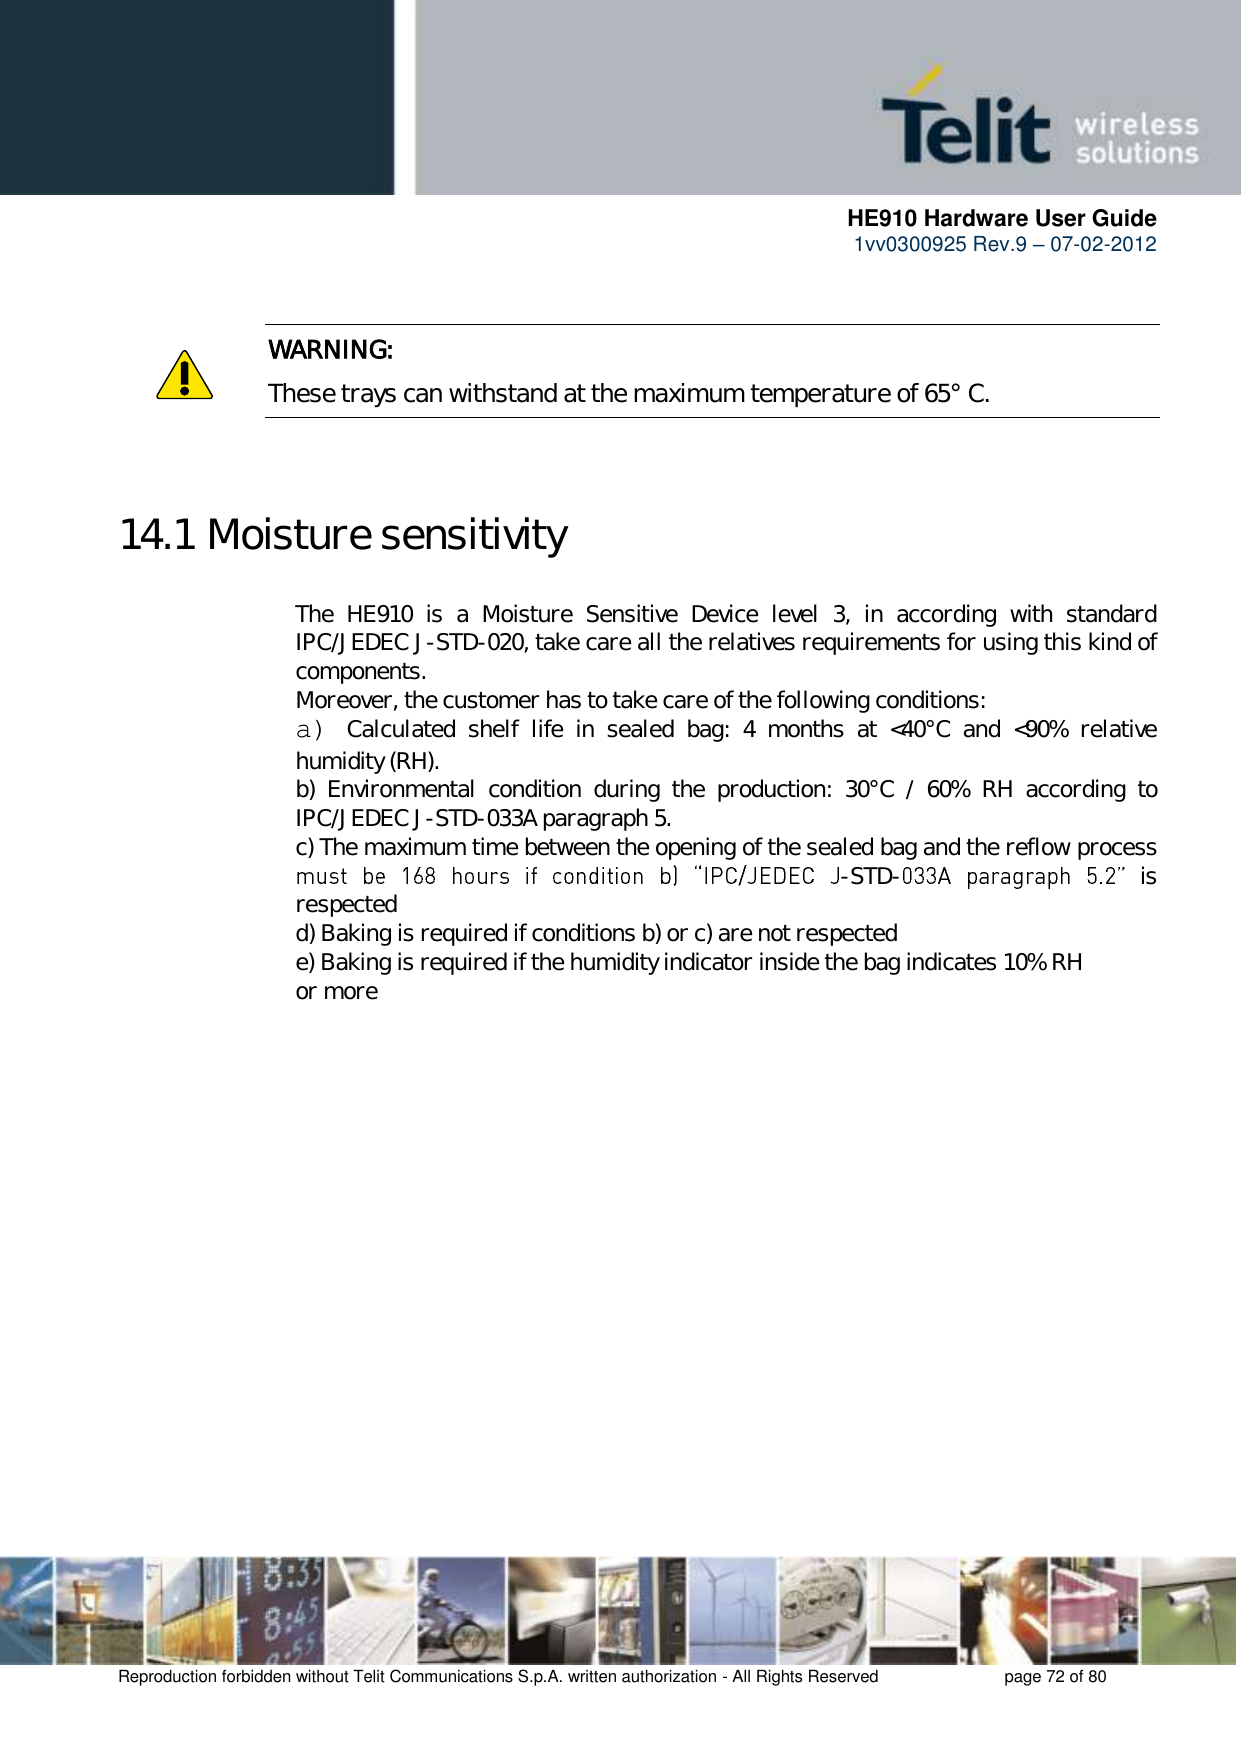      HE910 Hardware User Guide 1vv0300925 Rev.9 – 07-02-2012    Reproduction forbidden without Telit Communications S.p.A. written authorization - All Rights Reserved    page 72 of 80   WARNING: These trays can withstand at the maximum temperature of 65° C.   14.1 Moisture sensitivity The  HE910  is  a  Moisture  Sensitive  Device  level  3,  in  according  with  standard IPC/JEDEC J-STD-020, take care all the relatives requirements for using this kind of components. Moreover, the customer has to take care of the following conditions: a) Calculated  shelf  life  in  sealed  bag:  4  months  at  &lt;40°C  and  &lt;90%  relative humidity (RH). b)  Environmental  condition  during  the  production:  30°C  /  60%  RH  according  to IPC/JEDEC J-STD-033A paragraph 5. c) The maximum time between the opening of the sealed bag and the reflow process -STD-   is respected d) Baking is required if conditions b) or c) are not respected e) Baking is required if the humidity indicator inside the bag indicates 10% RH or more        